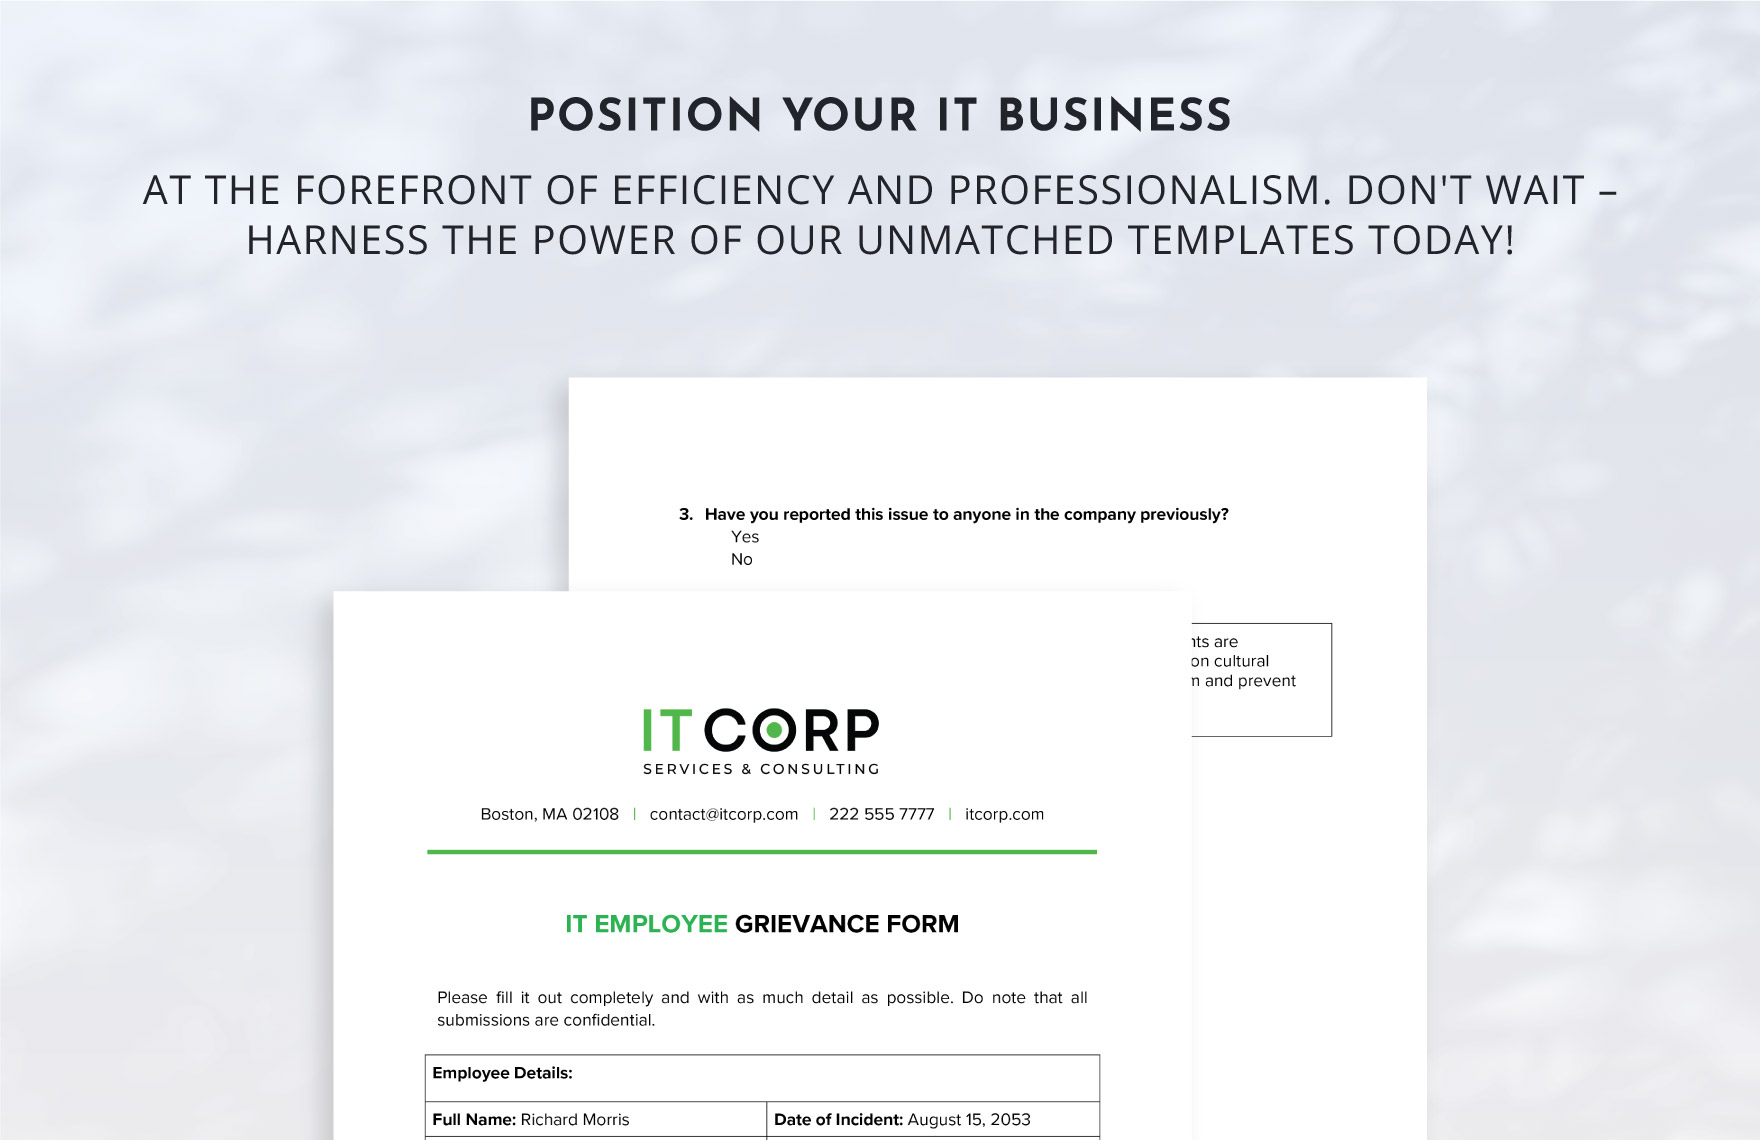 IT Employee Grievance Form Template